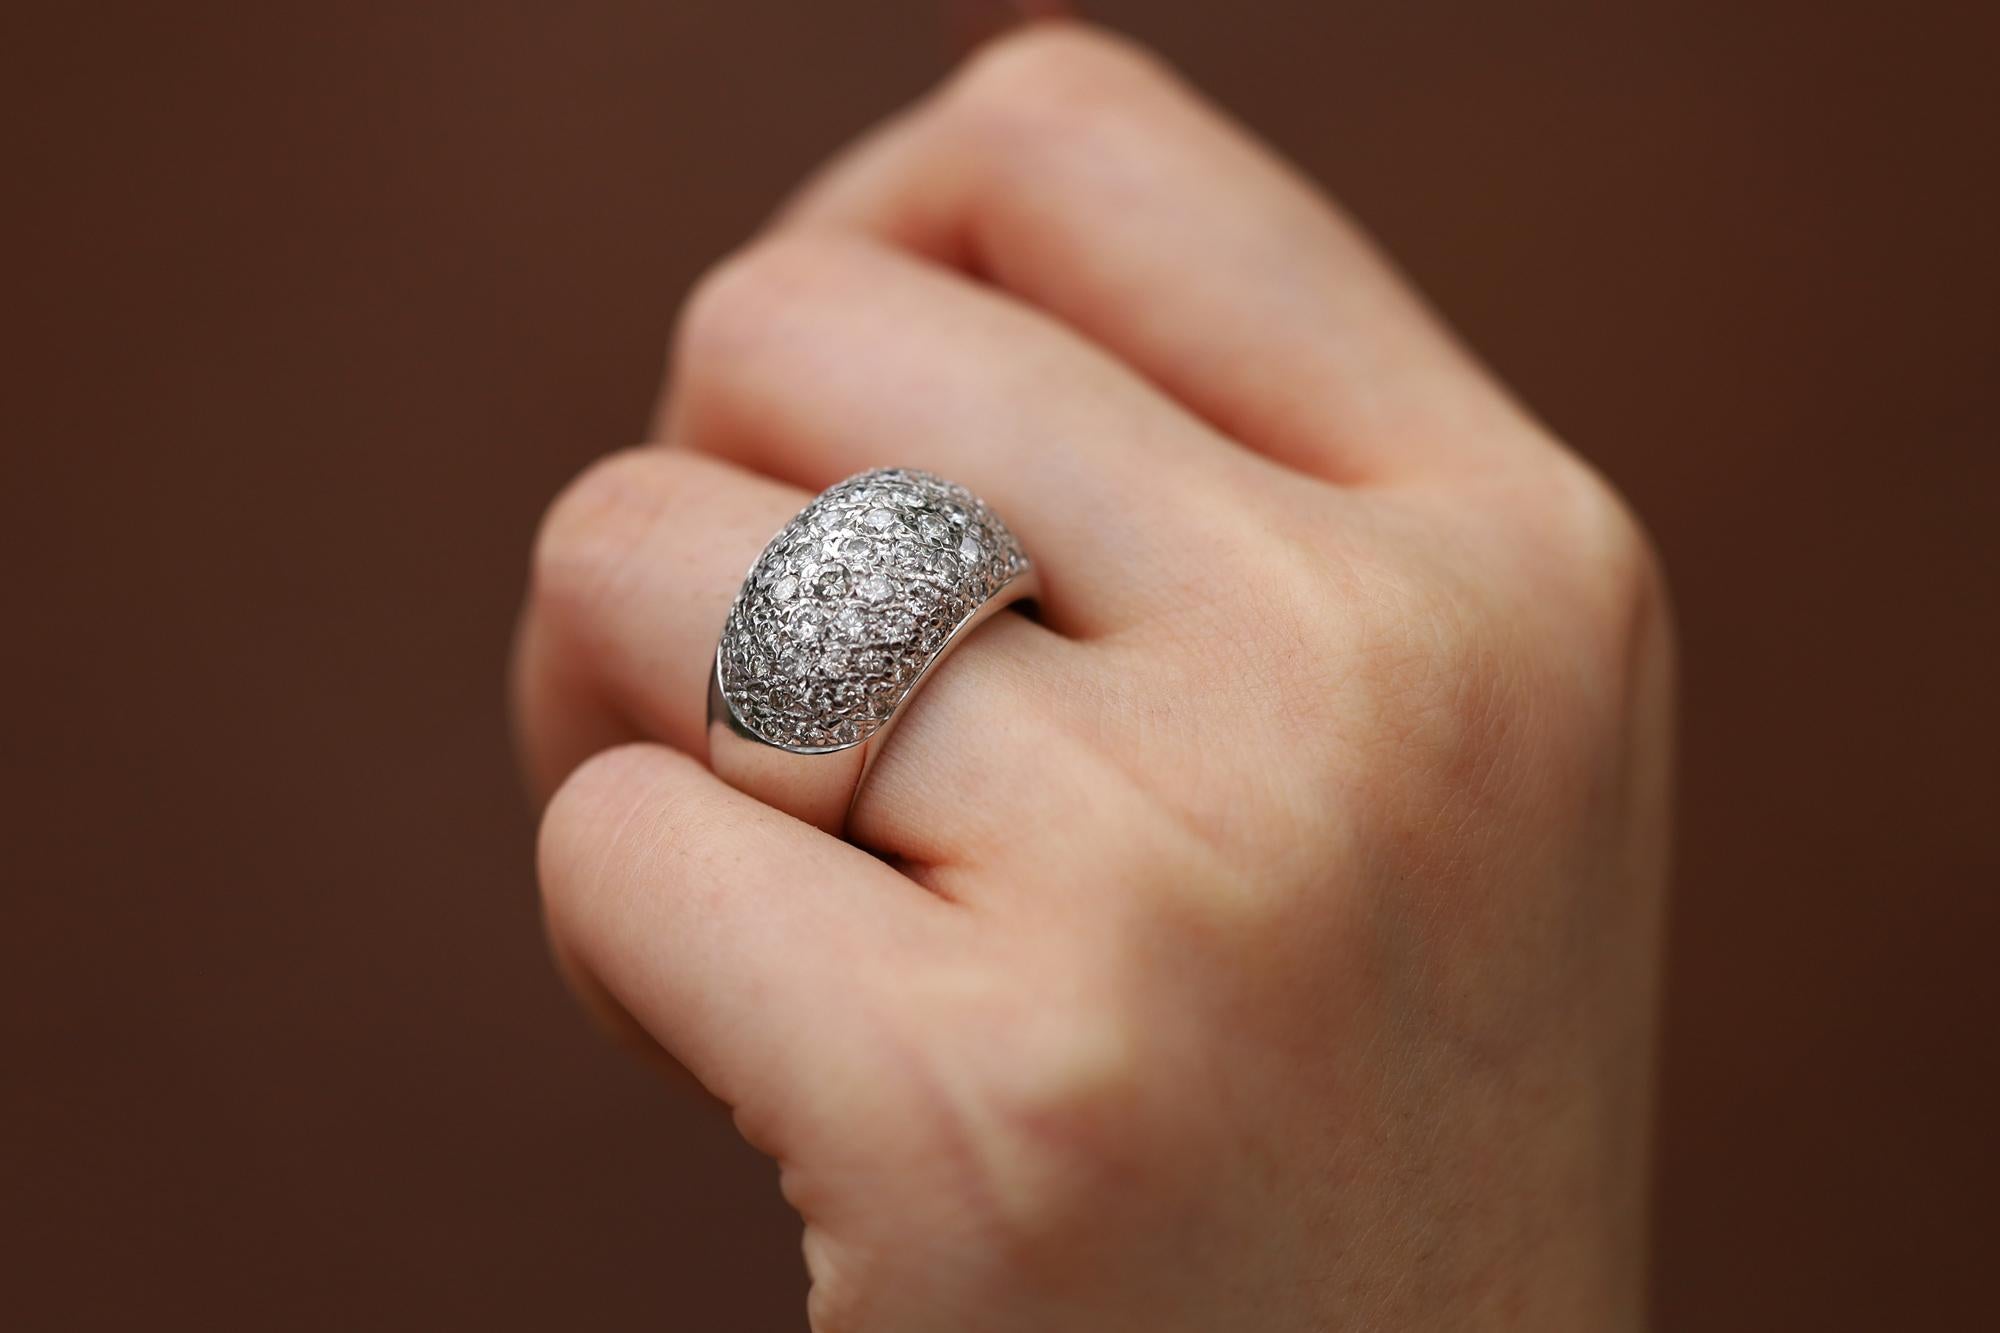 This classy contemporary dome ring is a fantastic piece that displays glimmering scintillation. The bombé ring boasts a stunning 1.50 carats of 70 natural pavé diamonds, sparkling with modern brilliance. Lovingly crafted with 14 karat white gold